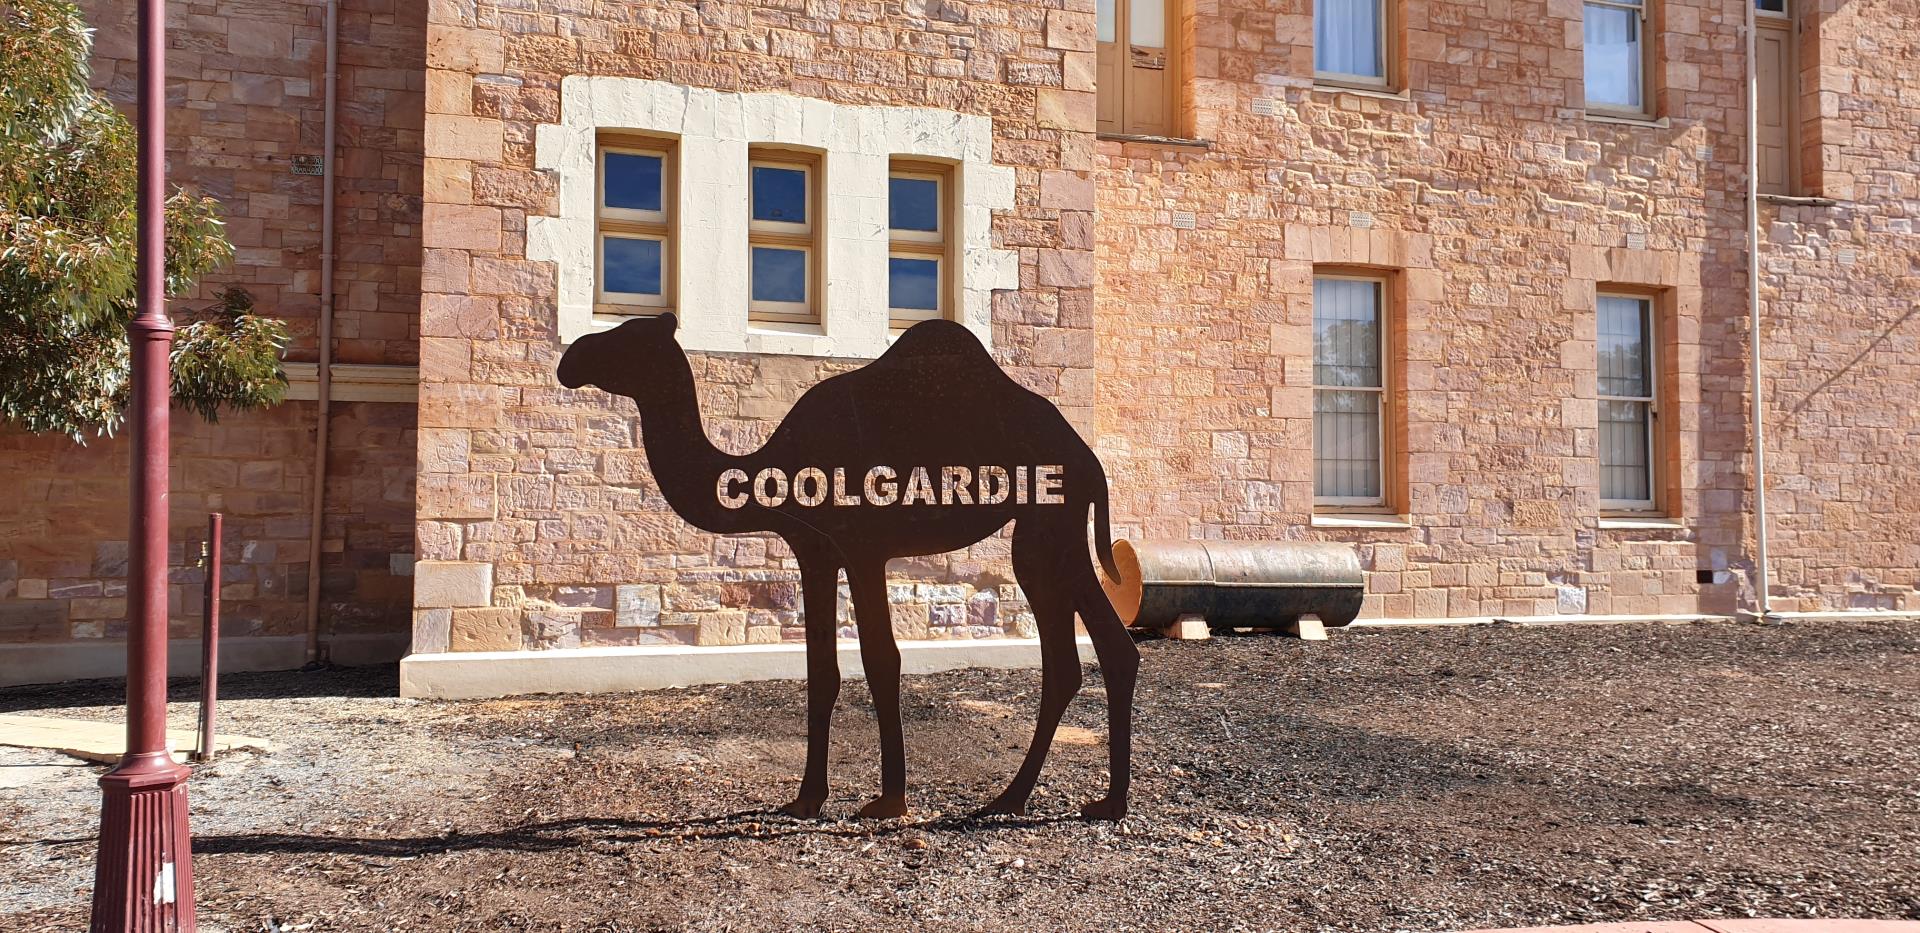 Coolgardie Two Day Travel Itinerary Image